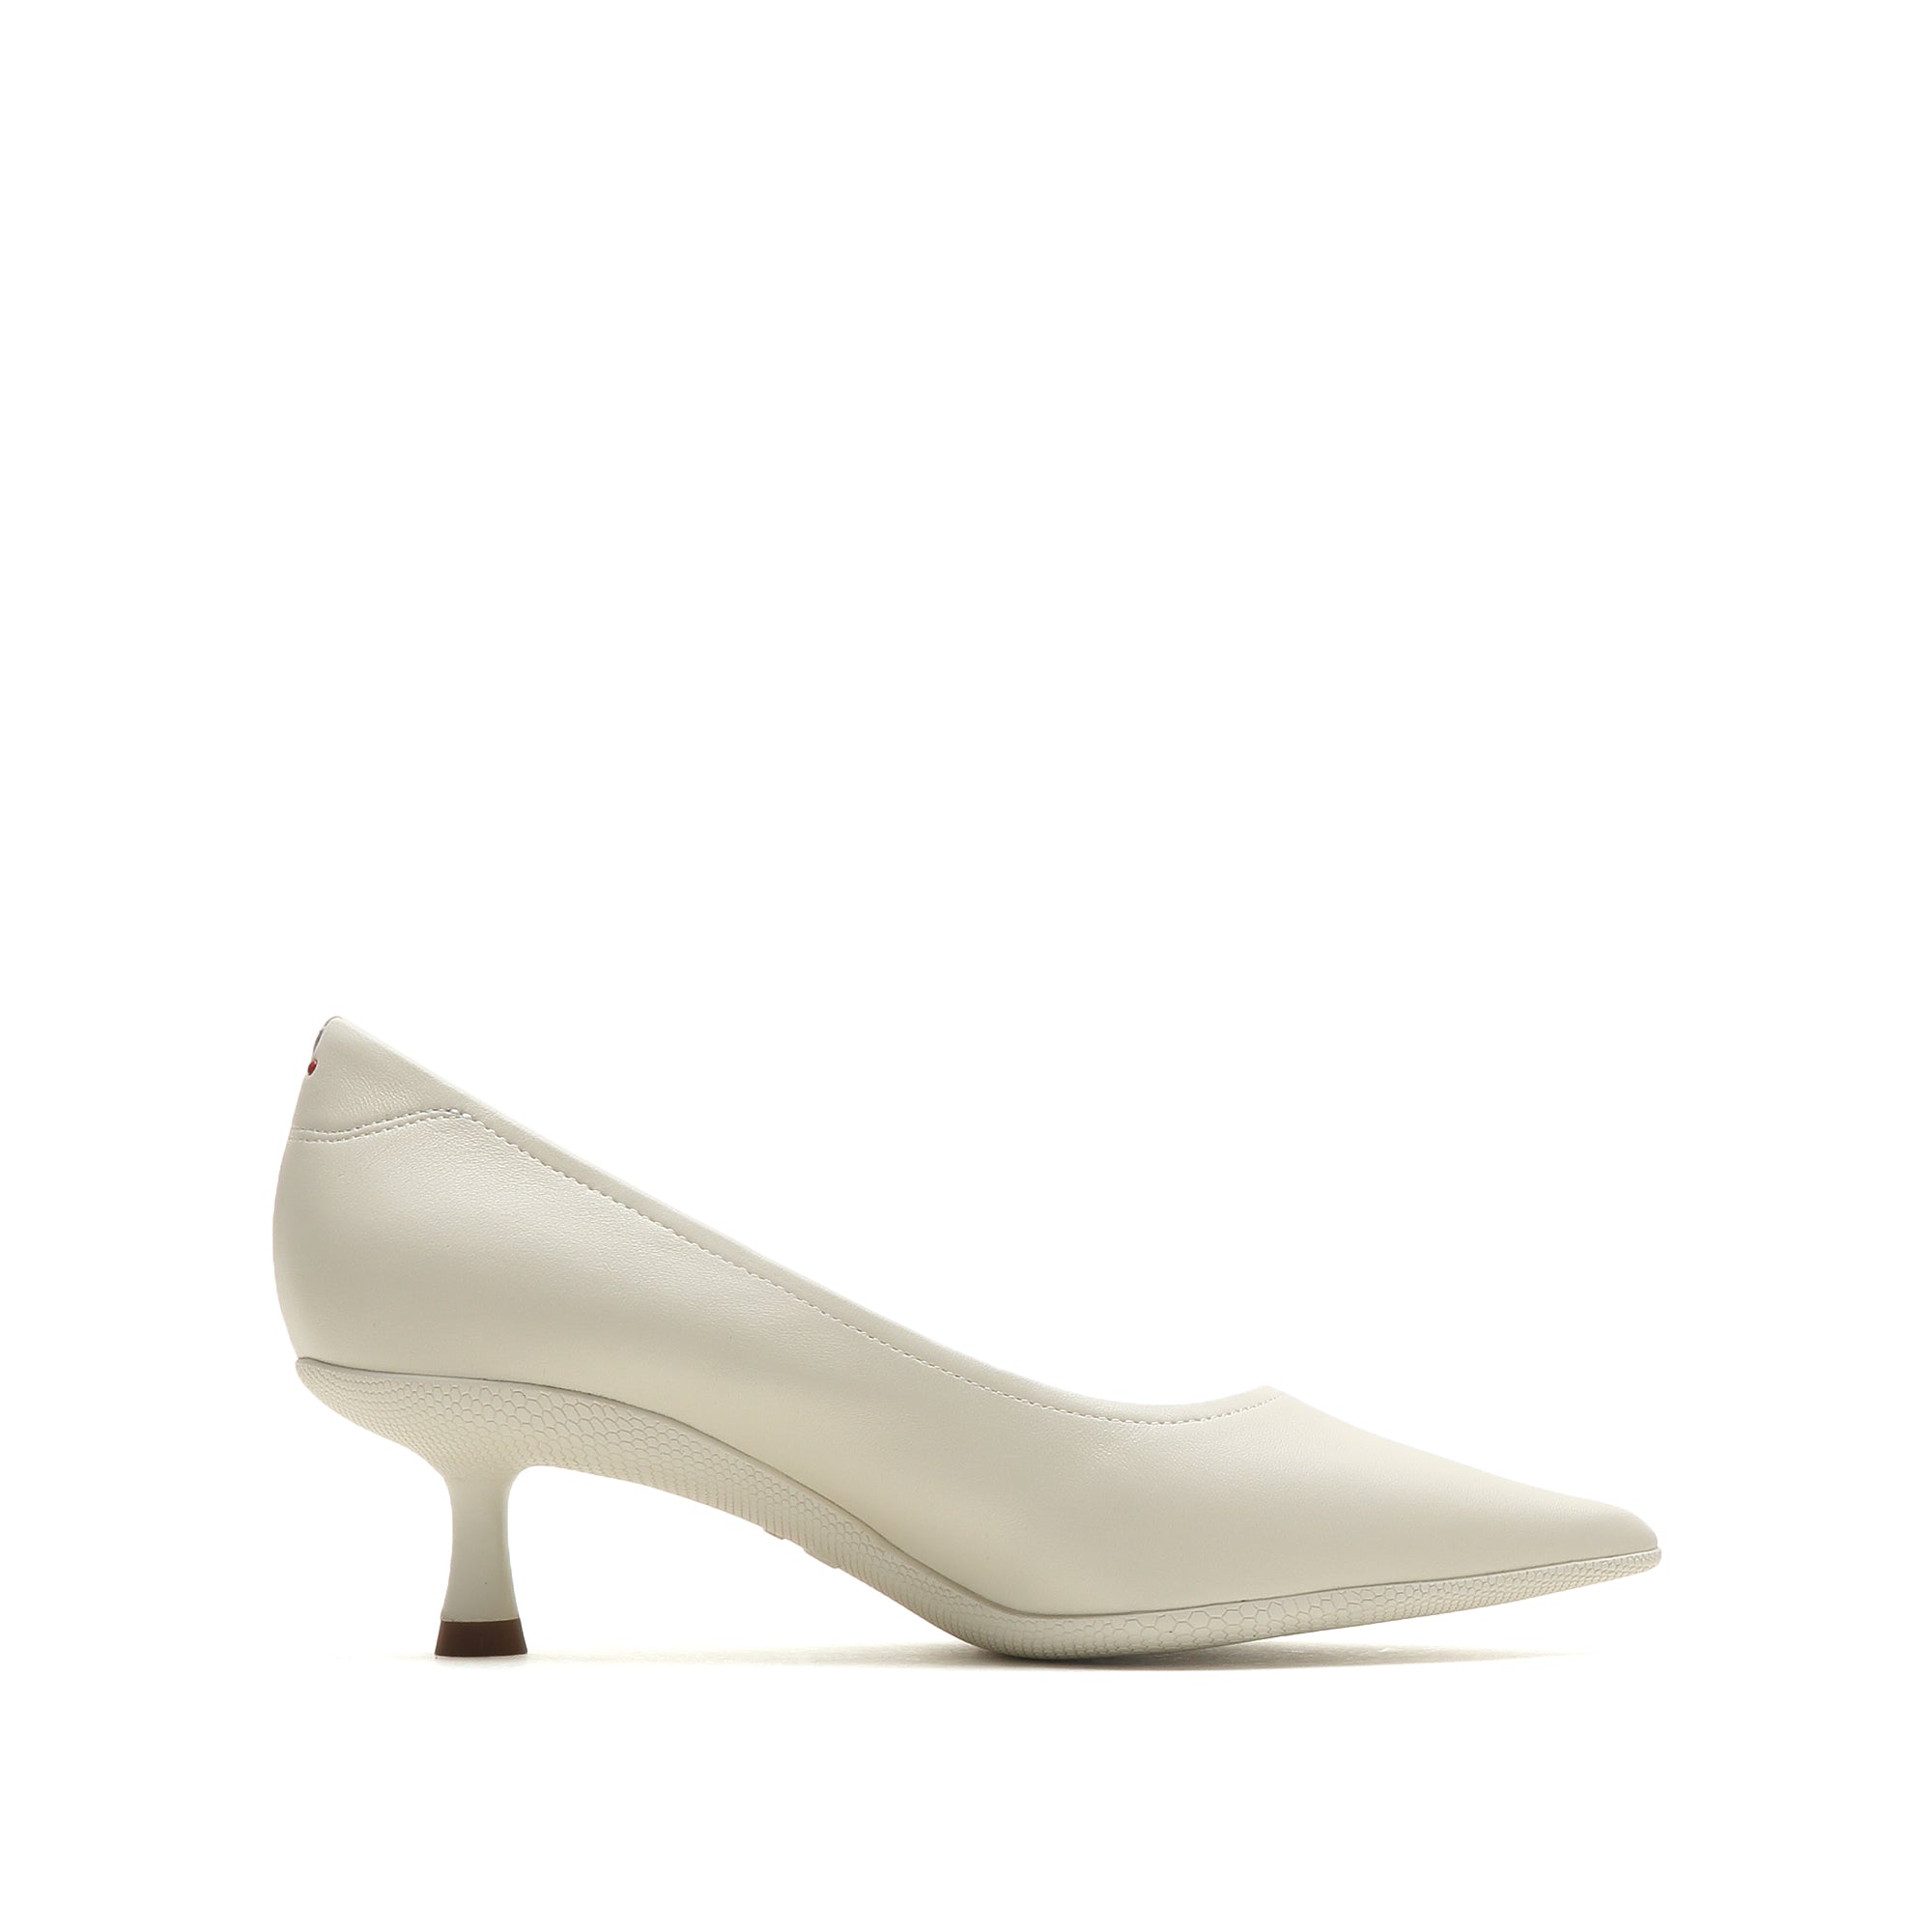 Beige Leather Pointed Toe Pumps